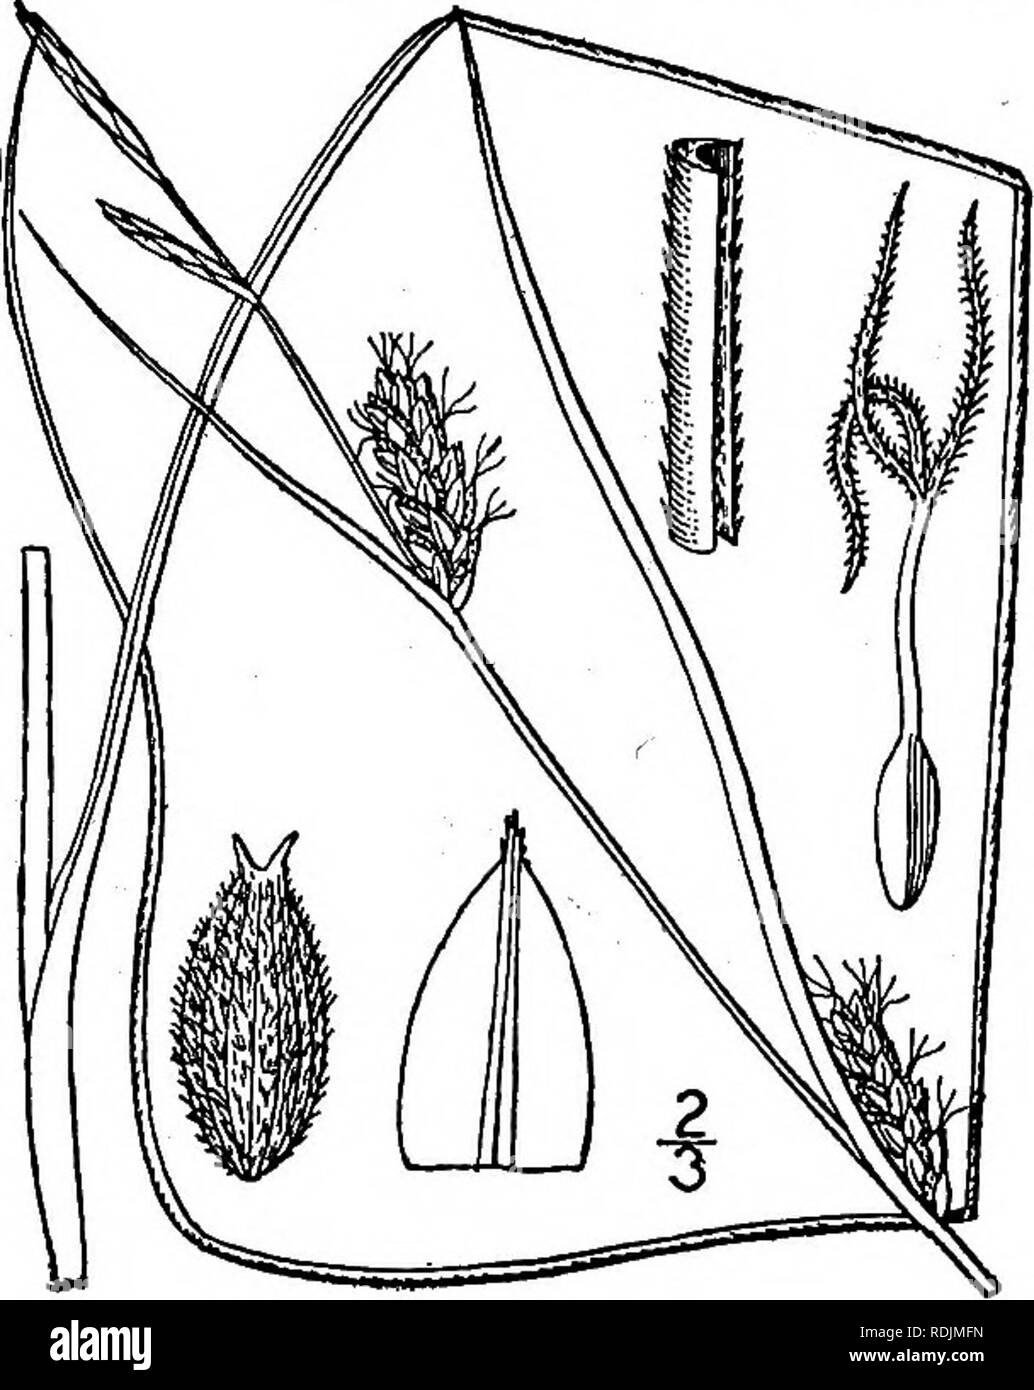 . An illustrated flora of the northern United States, Canada and the British possessions, from Newfoundland to the parallel of the southern boundary of Virginia, and from the Atlantic Ocean westward to the 102d meridian. Botany; Botany. 201. Carex lasiocarpa Ehrh. Slender Sedge. Fig. 1068.. C. lasiocarpa Ehrh. in Hannov. Magaz. 9: 132. 1784. C. filiformis Good, Trans. Linn. Soc. 2 : 172. 1794. Not L. Culms slender but stiff, smooth, obtusely angled, 2°-3° tall, strongly reddened and filamentose at base. Leaves very narrow and attenuate, prolonged, invo- lute, 1&quot; wide or less, rough on the Stock Photo